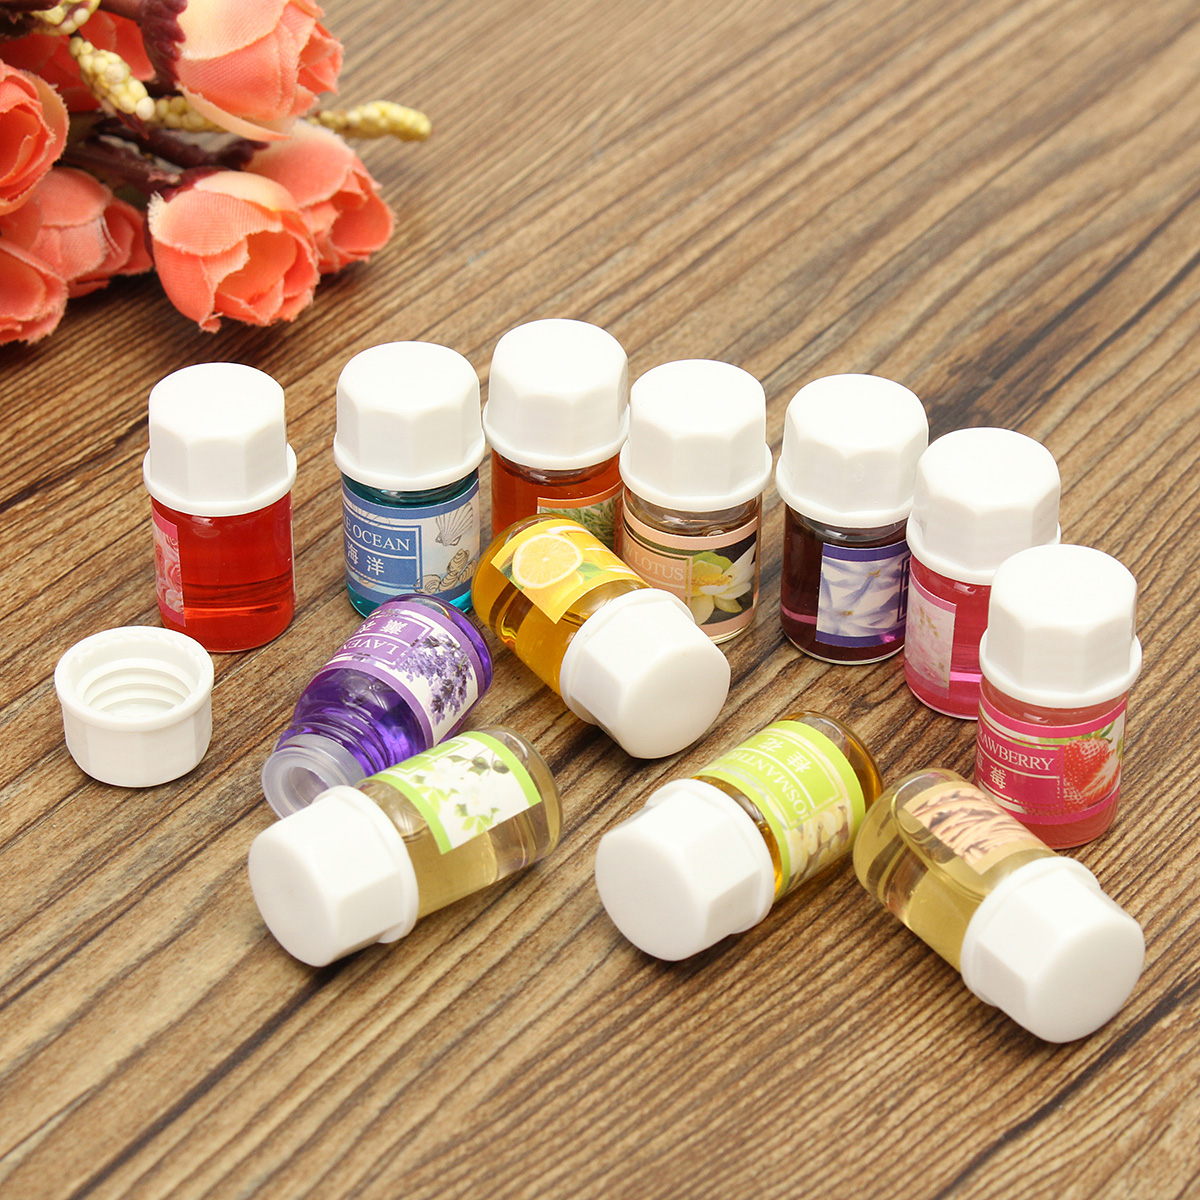 

36pcs Water-soluble Essential Oil Flower Spa Aromatherapy Pure Therapeutic Plant Headache Relief